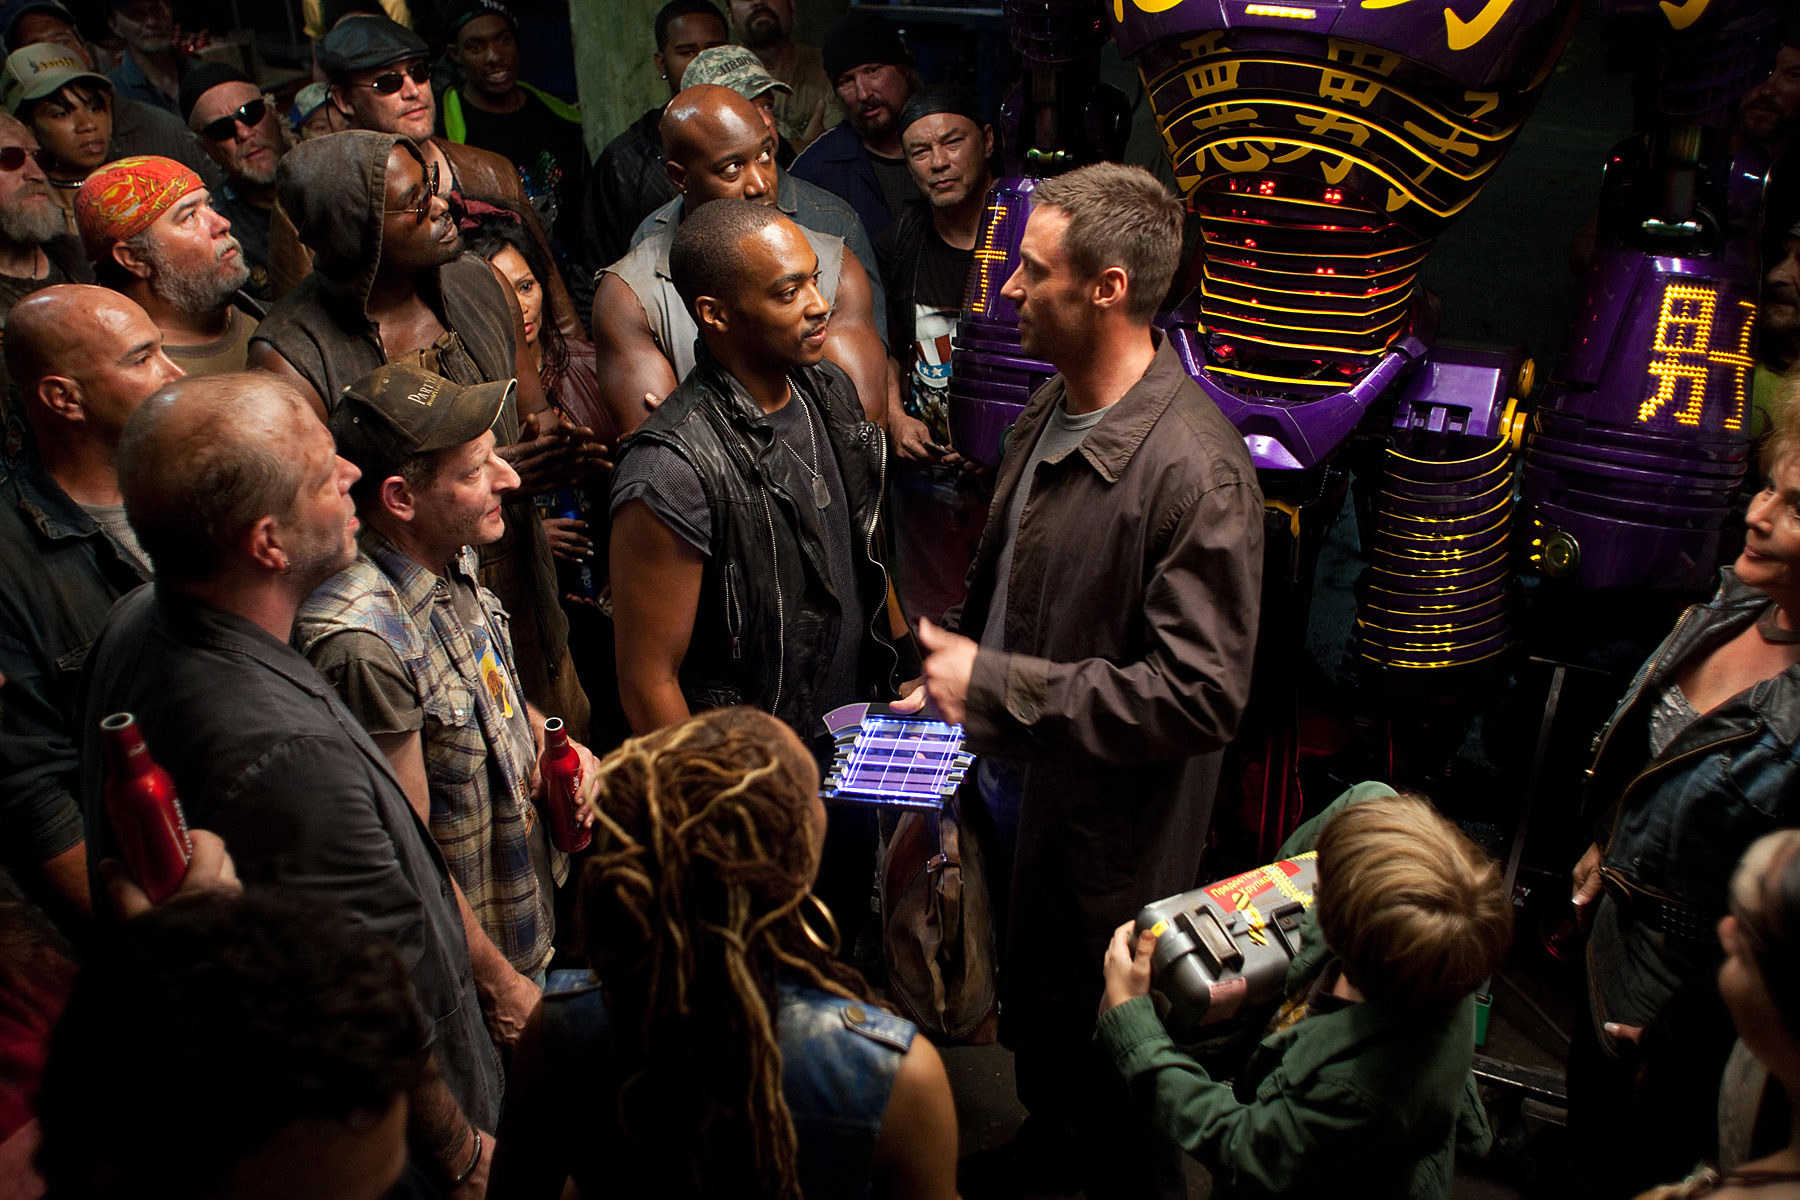 A group of people standing around in a scene from Real Steel